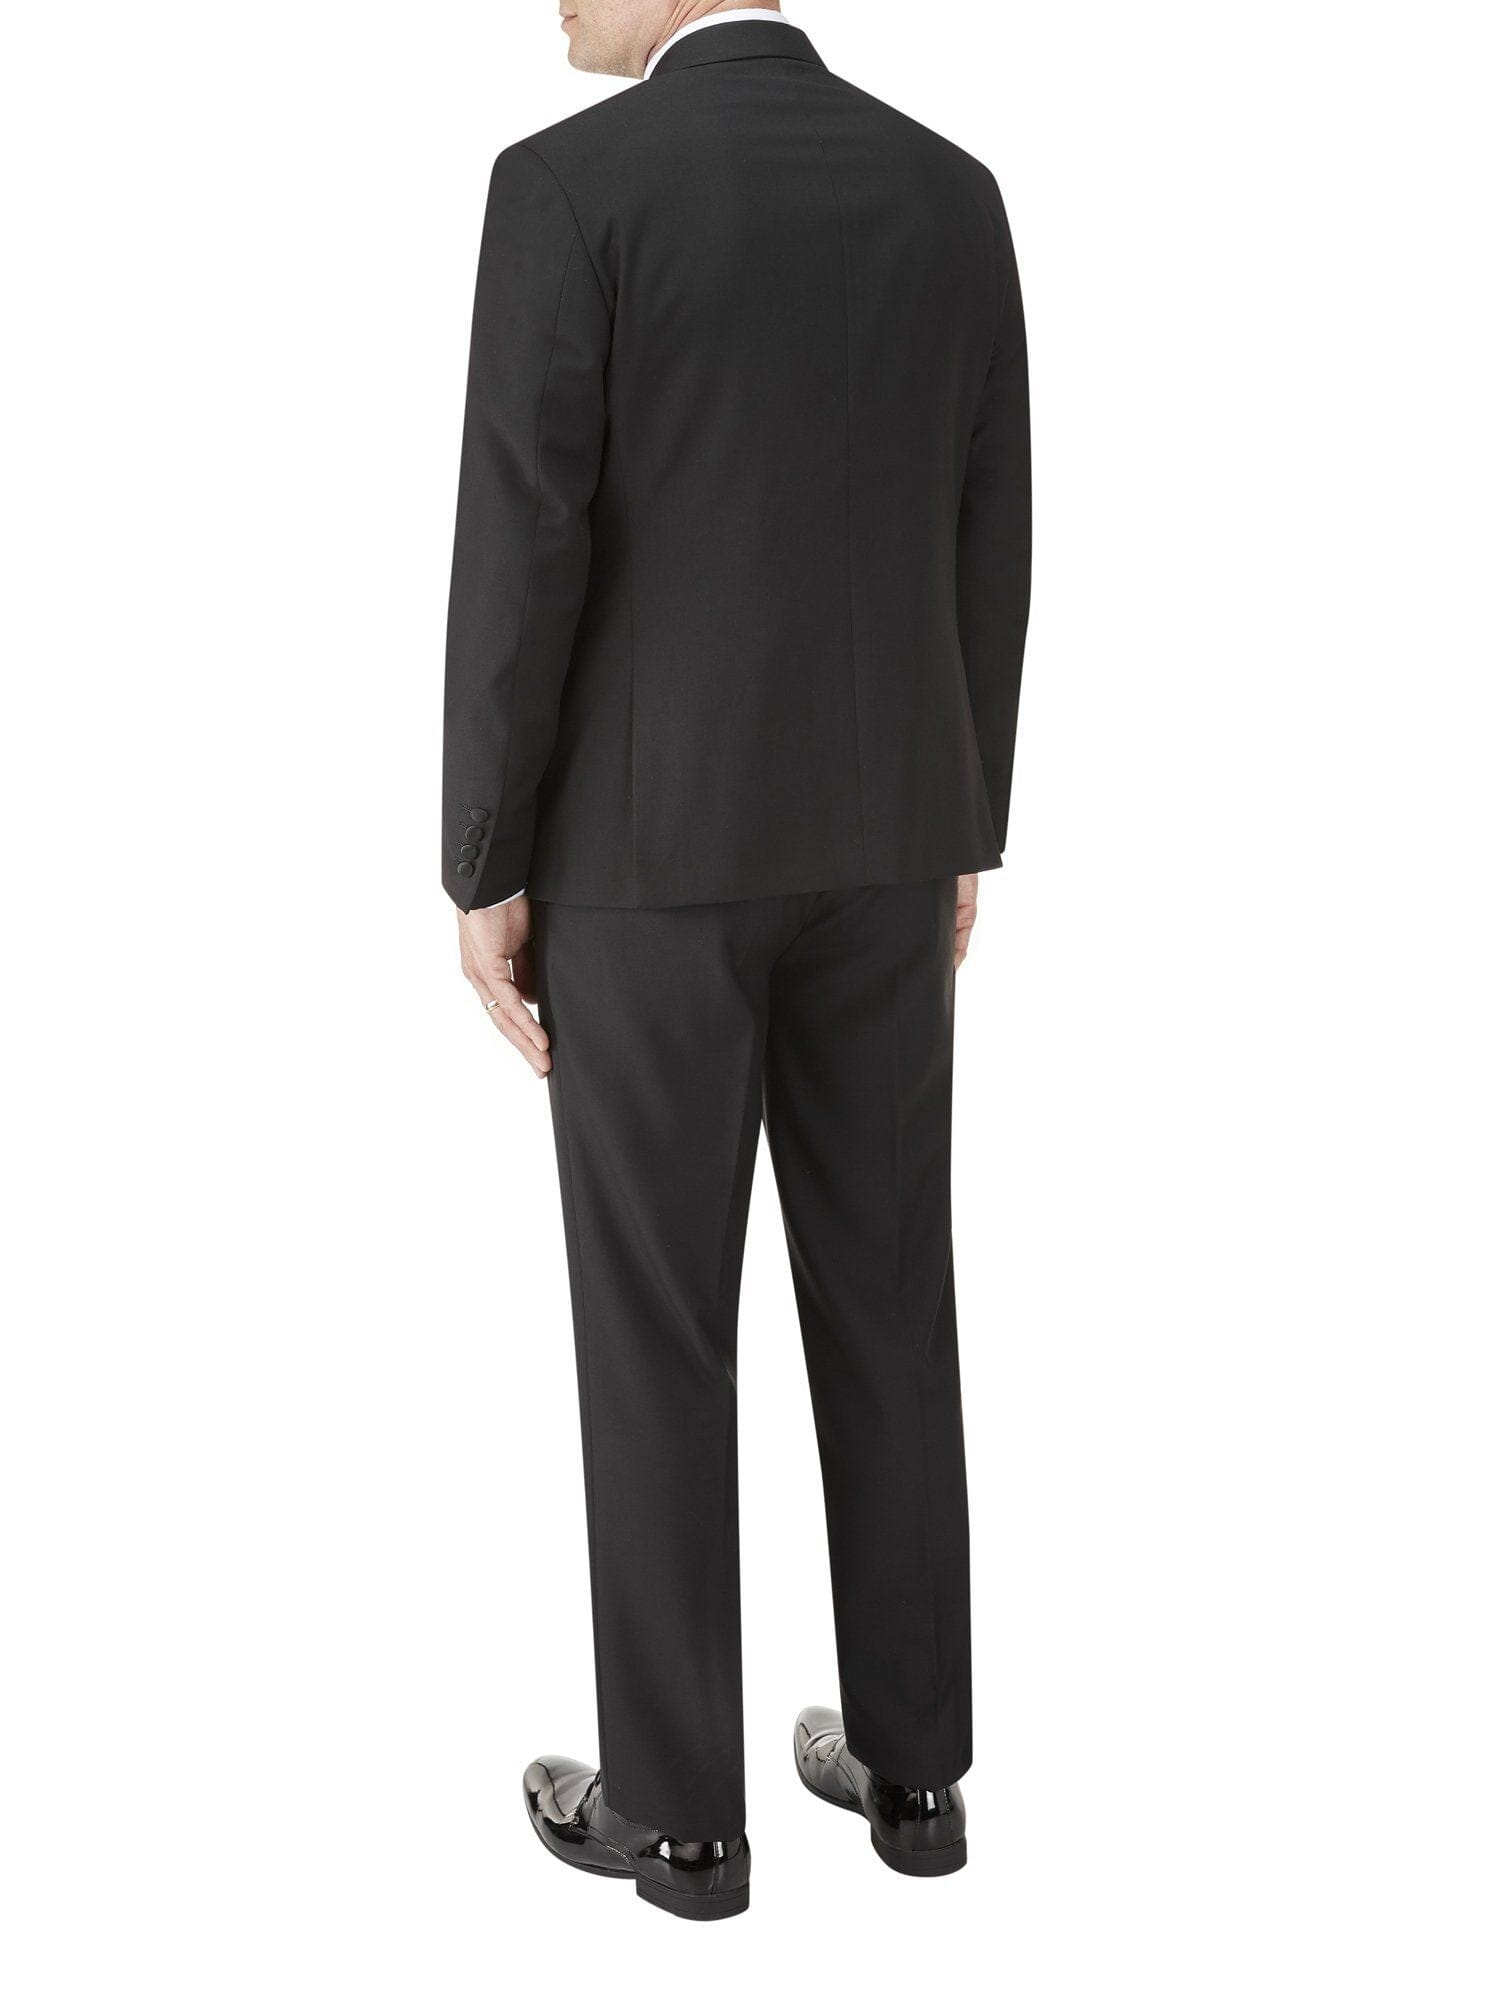 Sinatra Double Breasted 2 Piece Black Dinner Suit - Suits - - THREADPEPPER